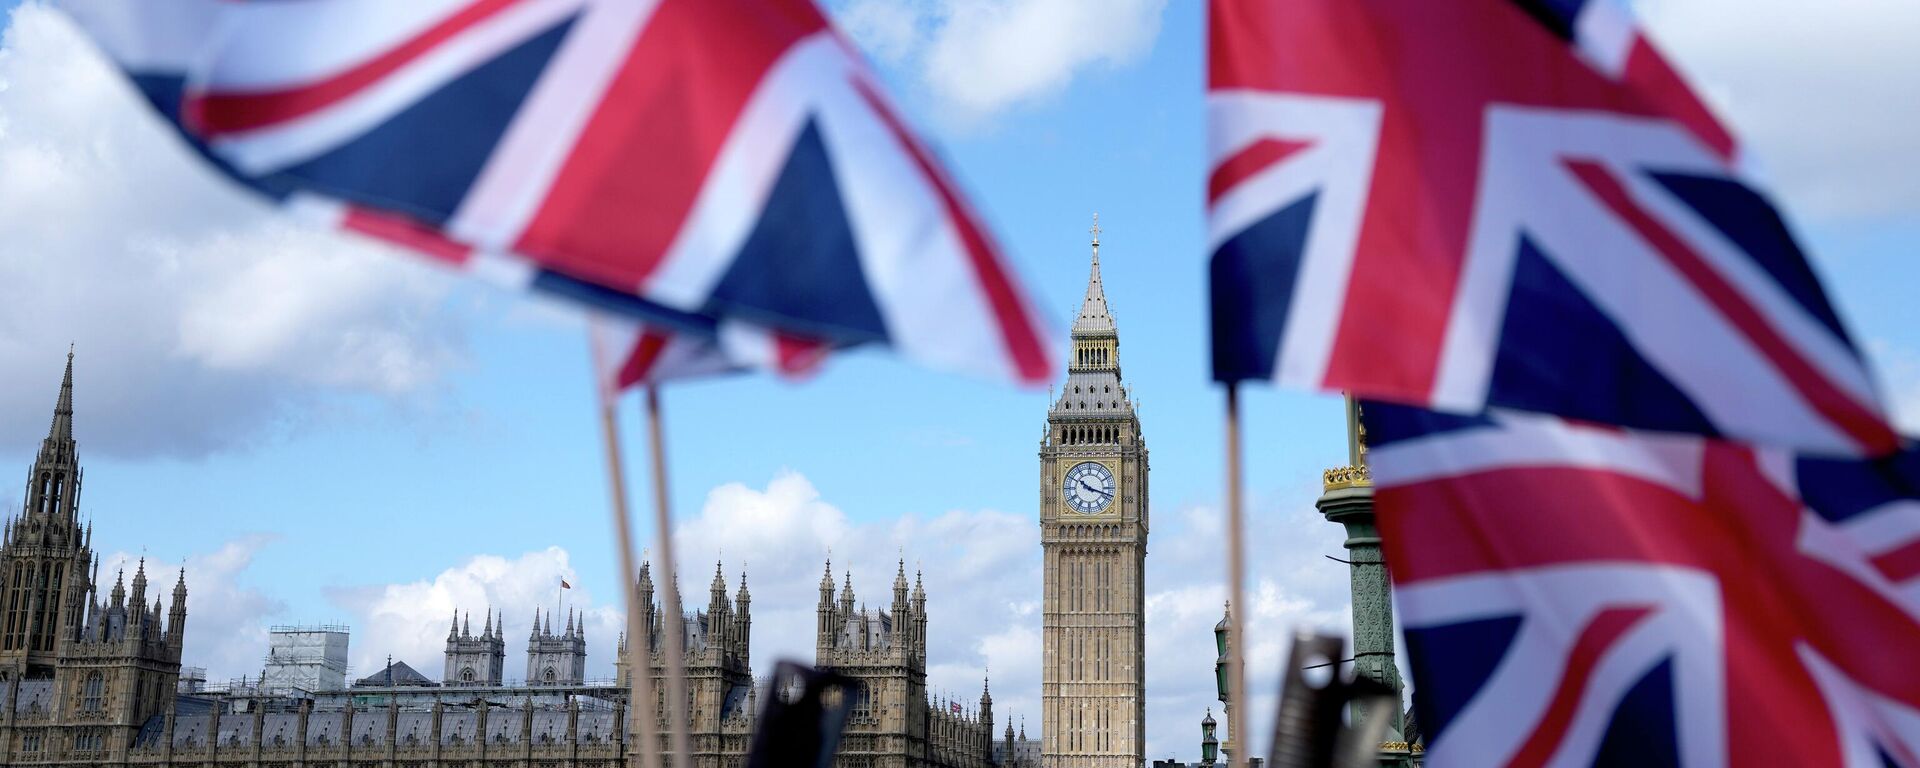 Union Jack flags are seen surrounding the Elizabeth Tower, known as Big Ben, beside the Houses of Parliament in London, Friday, June 24, 2022. - Sputnik International, 1920, 15.01.2023